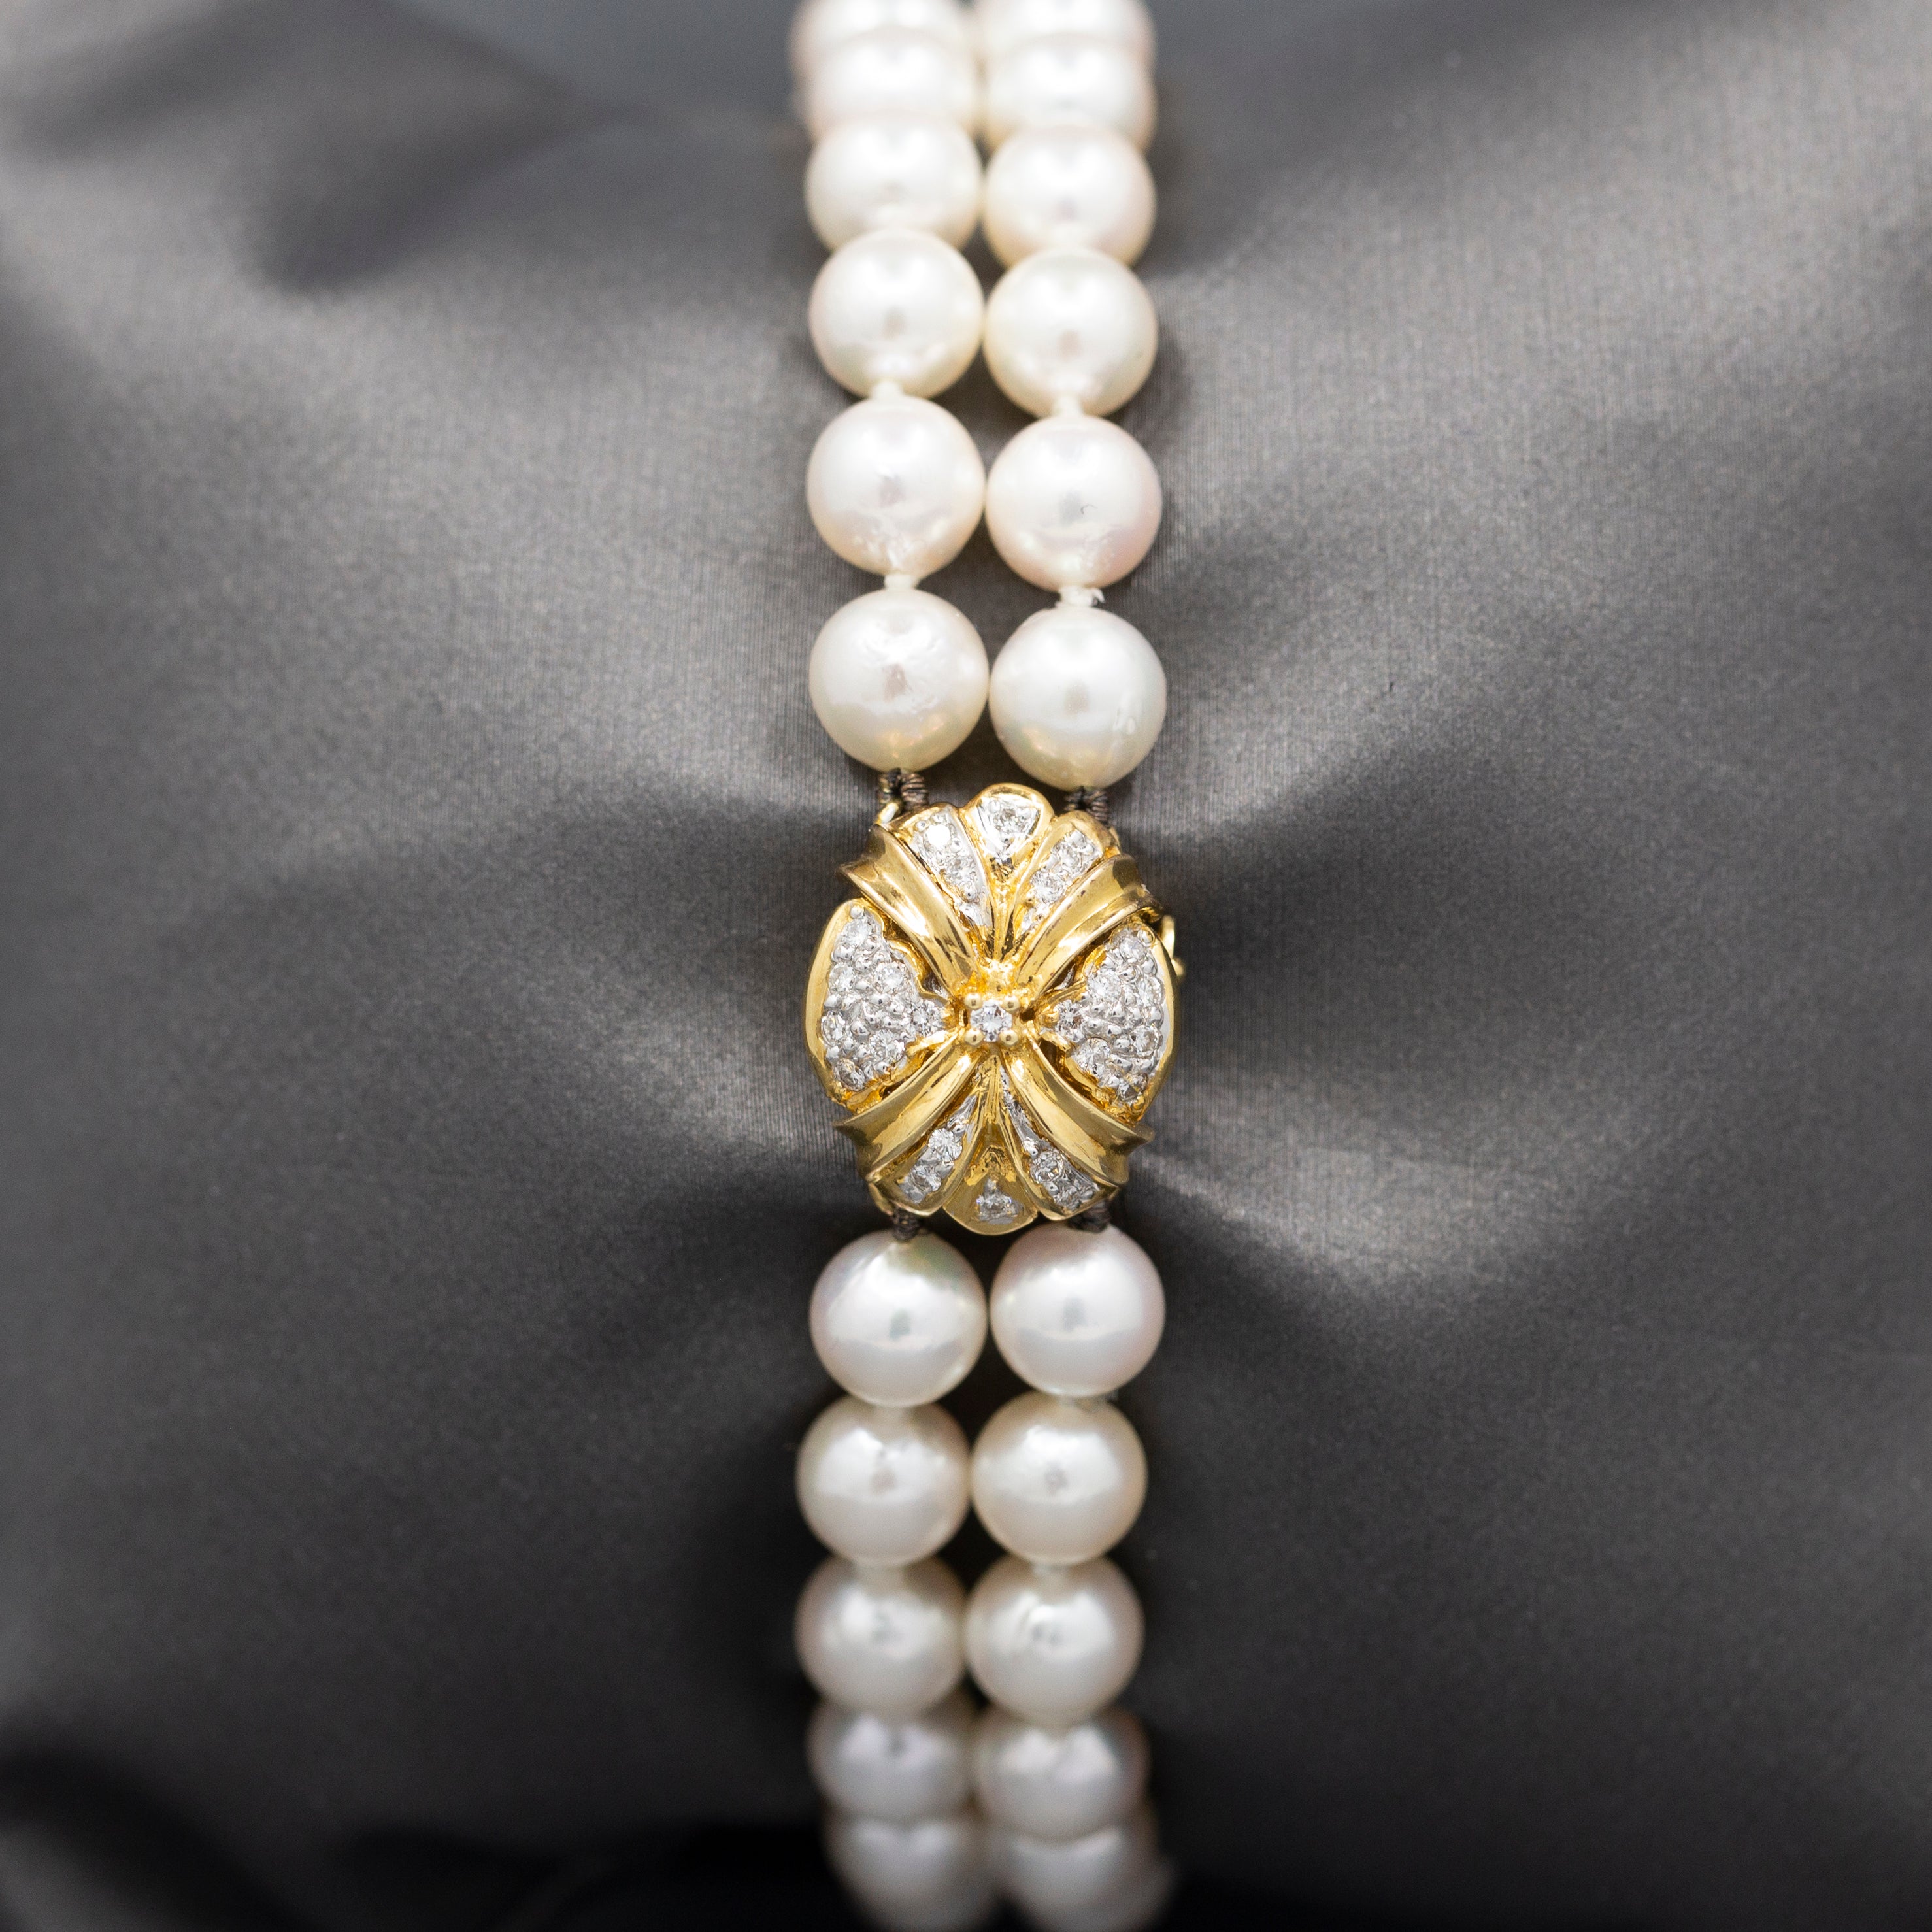 Luxurious Two Strand Cultured Pearl Bracelet with Diamond Clasp in 18k Yellow Gold